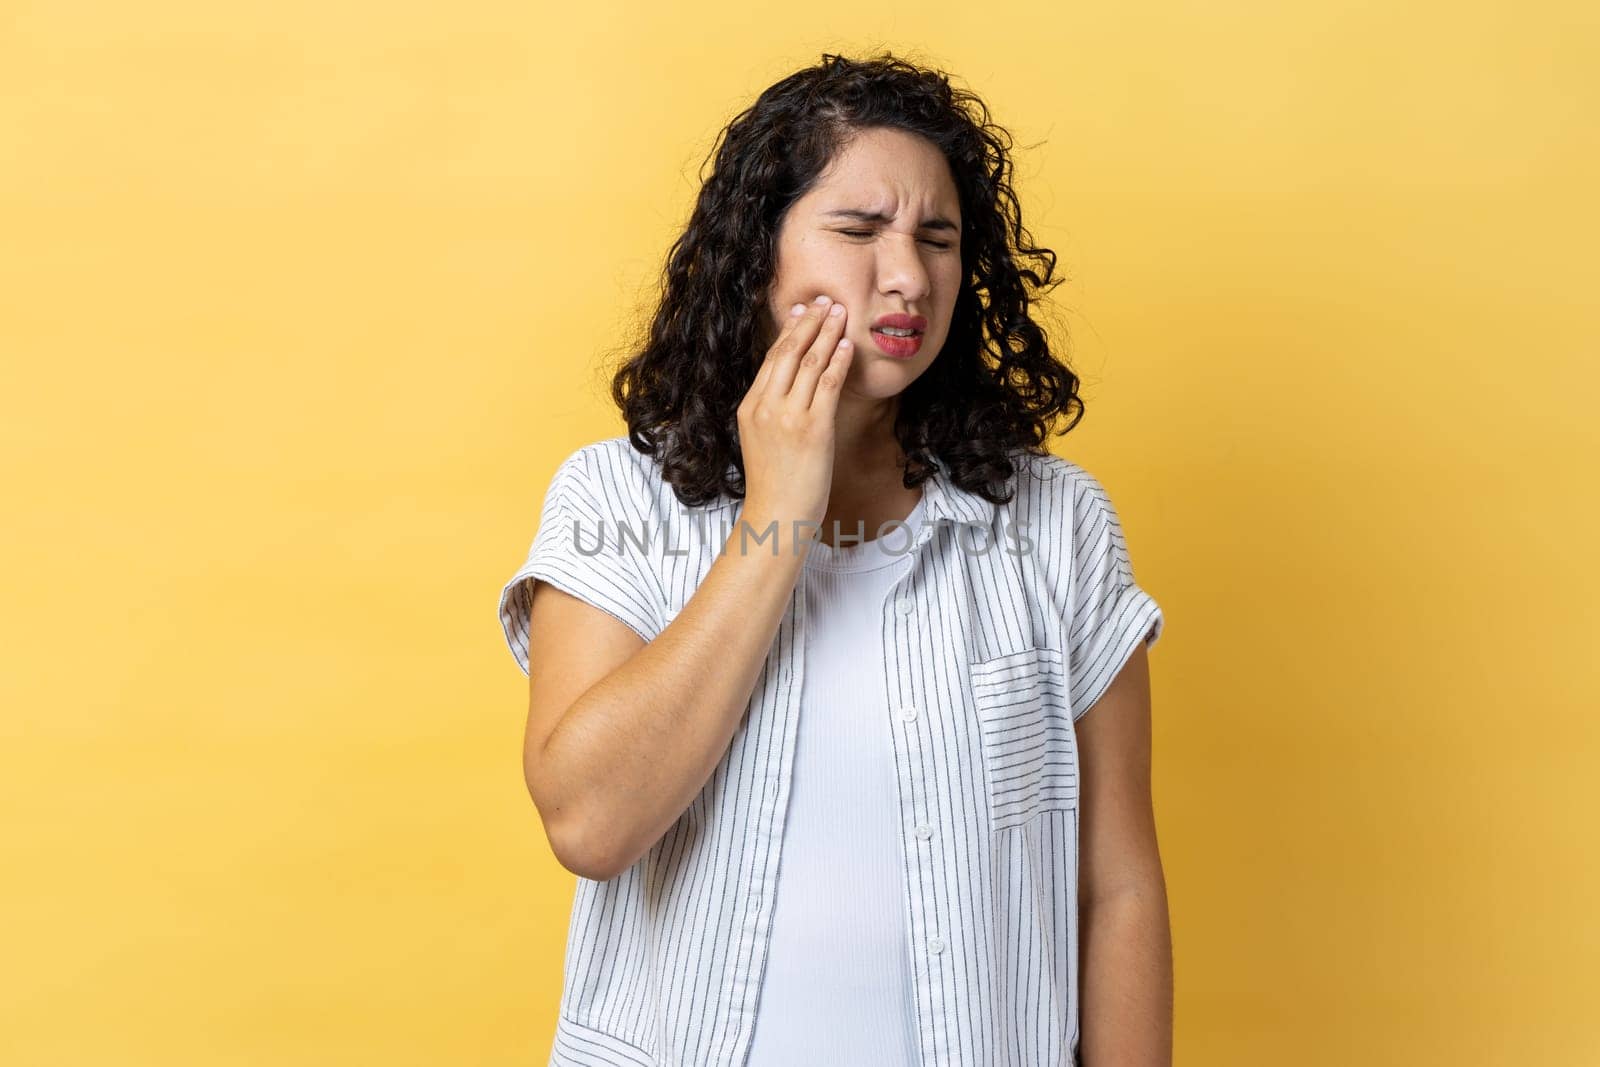 Portrait of unhealthy woman with dark wavy hair touching cheek and wincing in pain feeling terrible tooth ache, periodontal disease. Indoor studio shot isolated on yellow background.